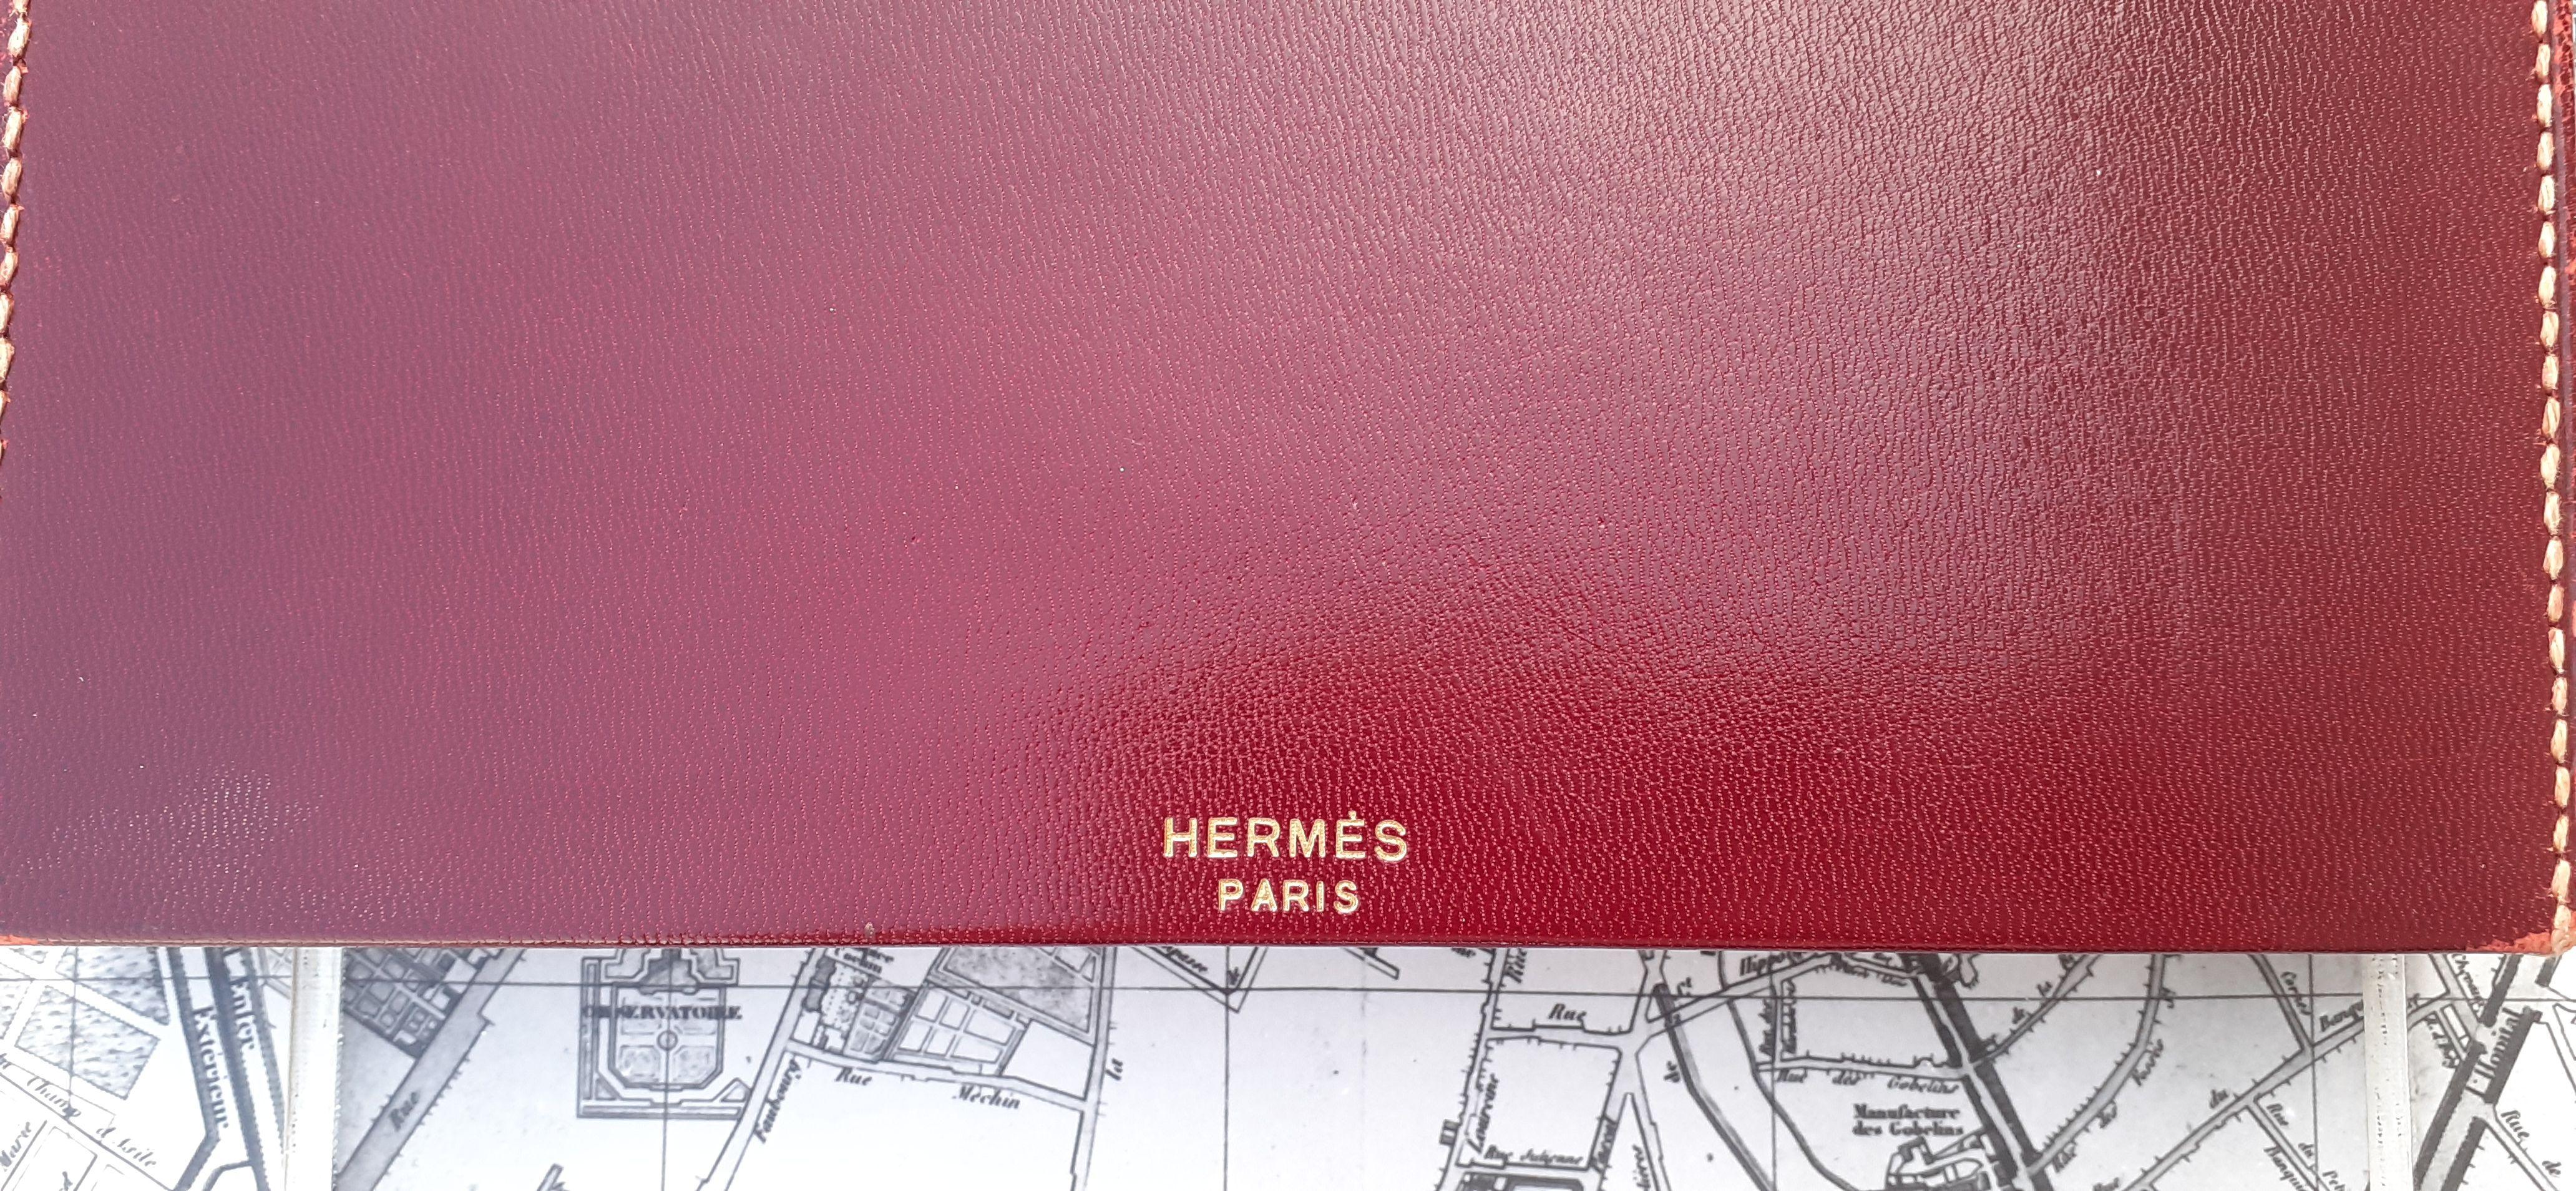 Women's Exceptional Old Paris France Map from 1853 in a Hermès Leather Case